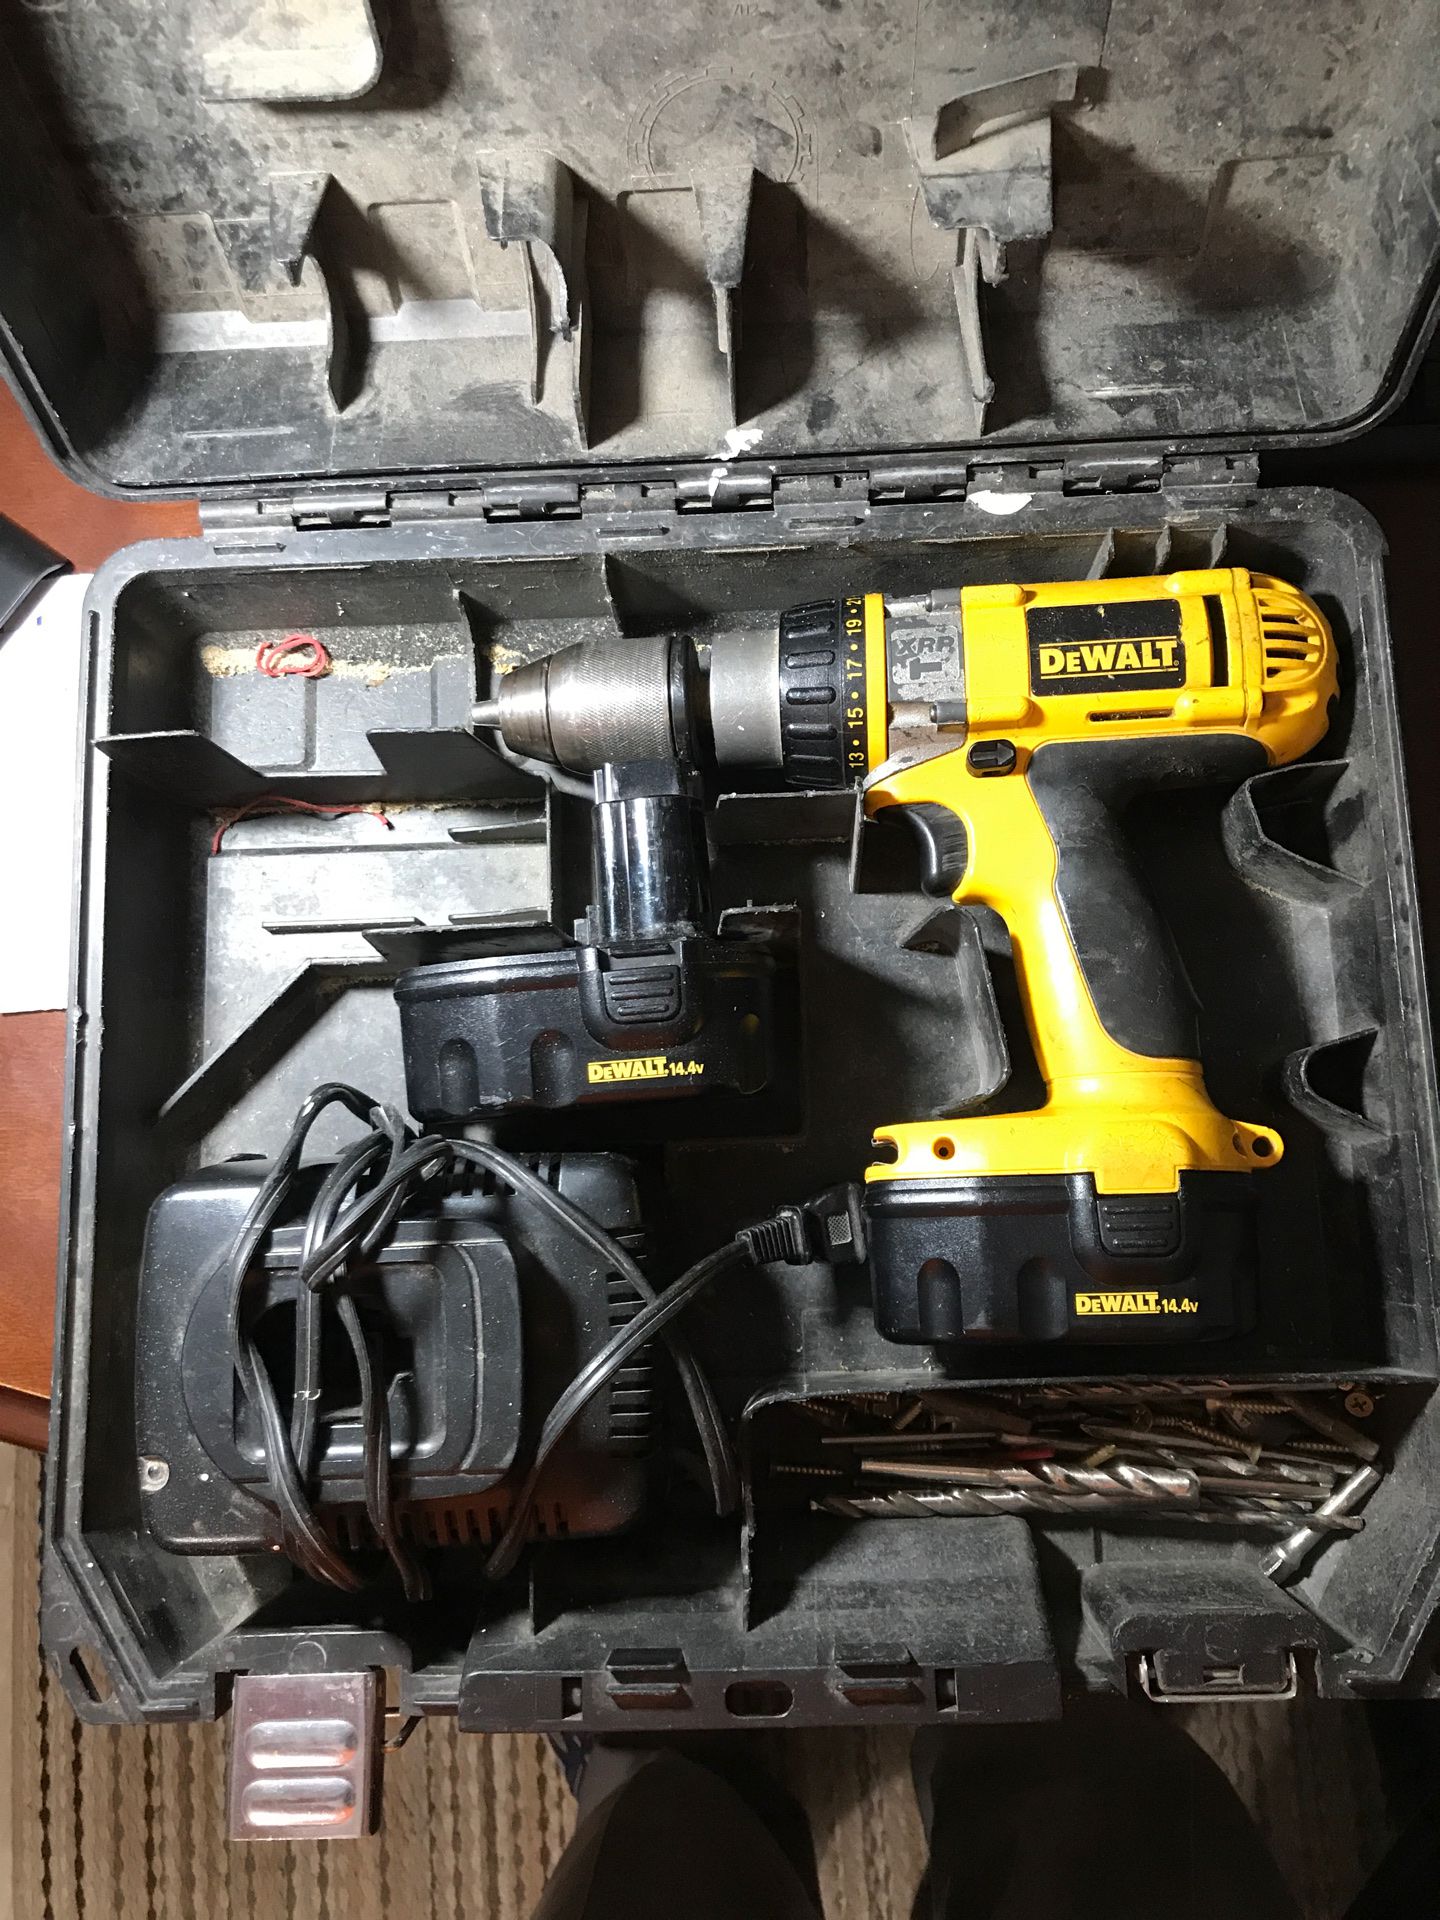 DeWALT Hammer drill 14.4 V two decent batteries and charger along with case